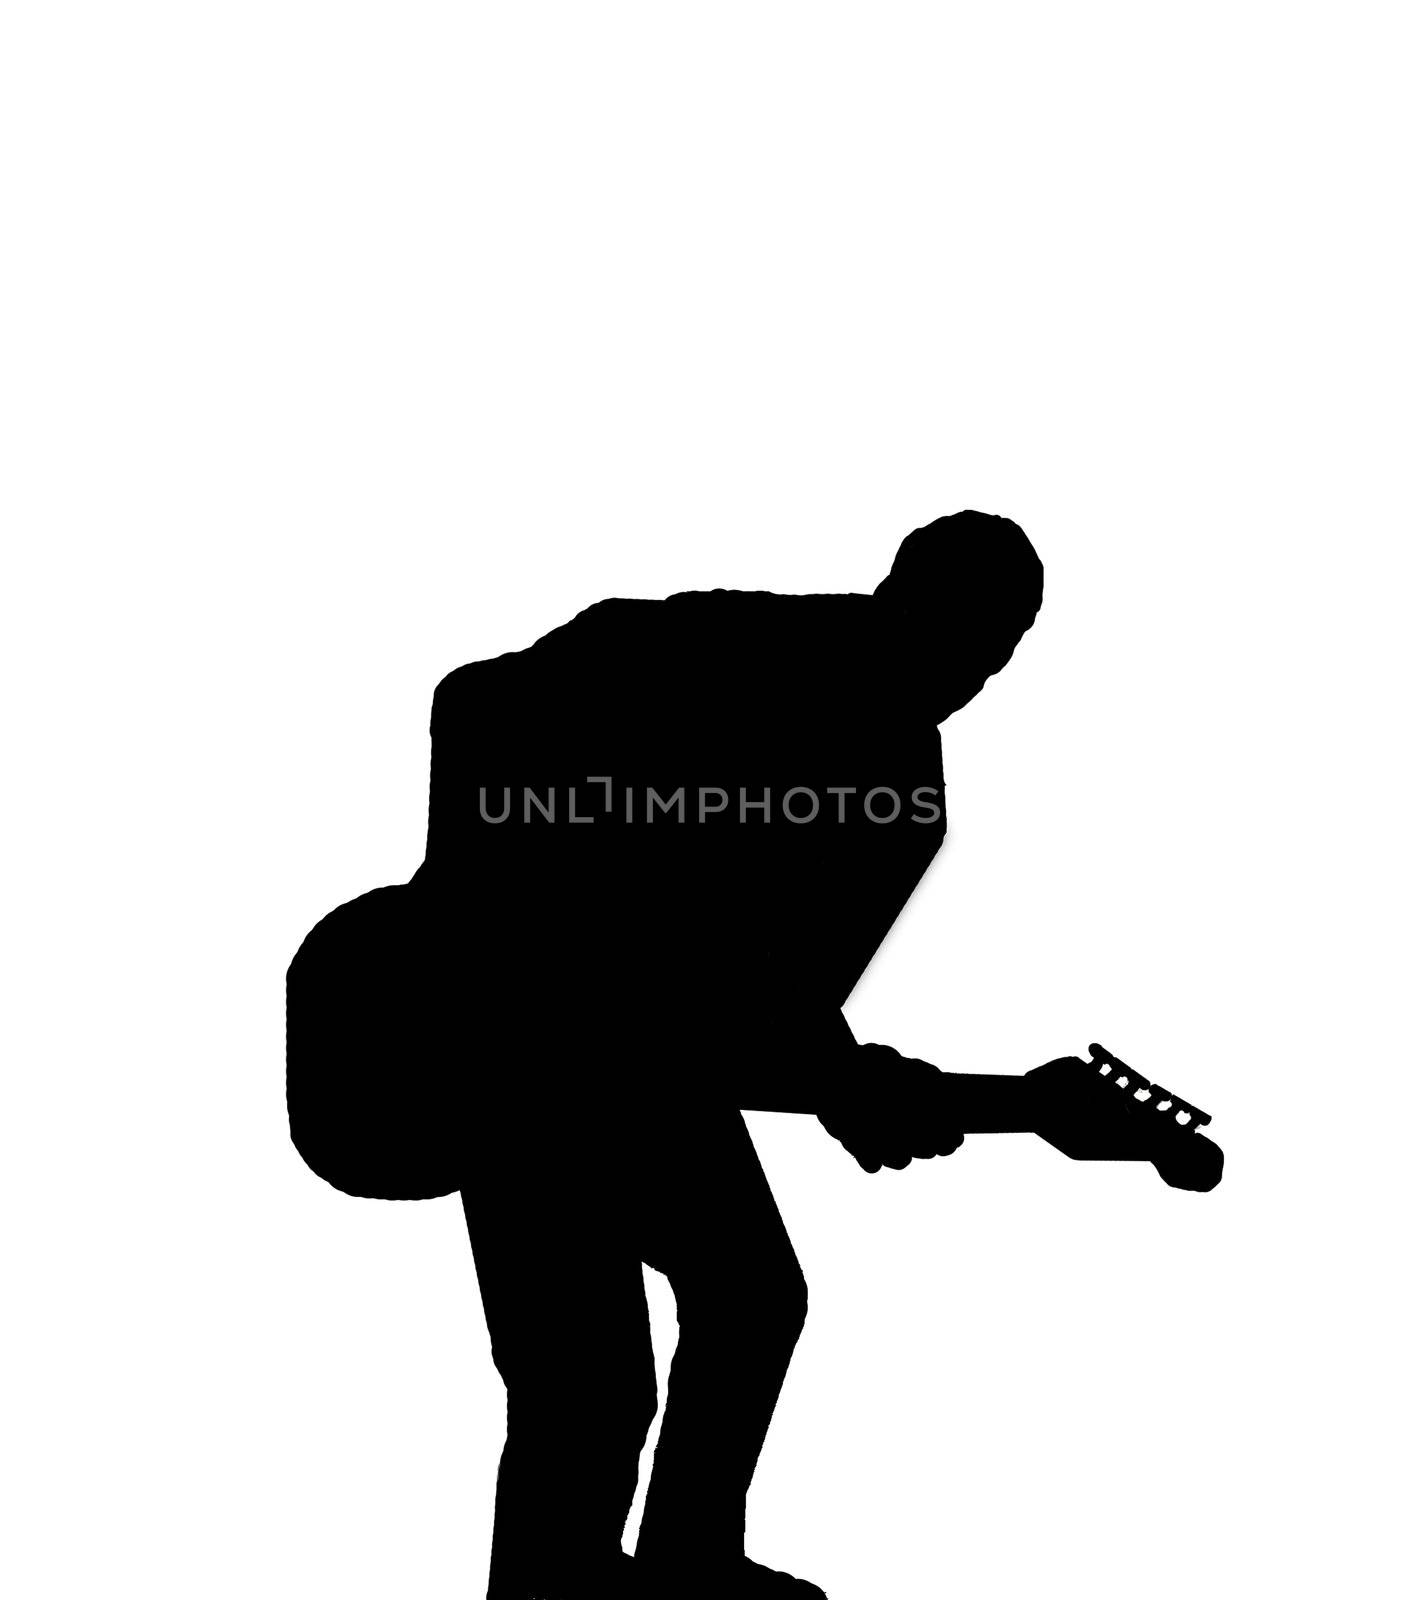 Silhouette of guitarist by Koufax73